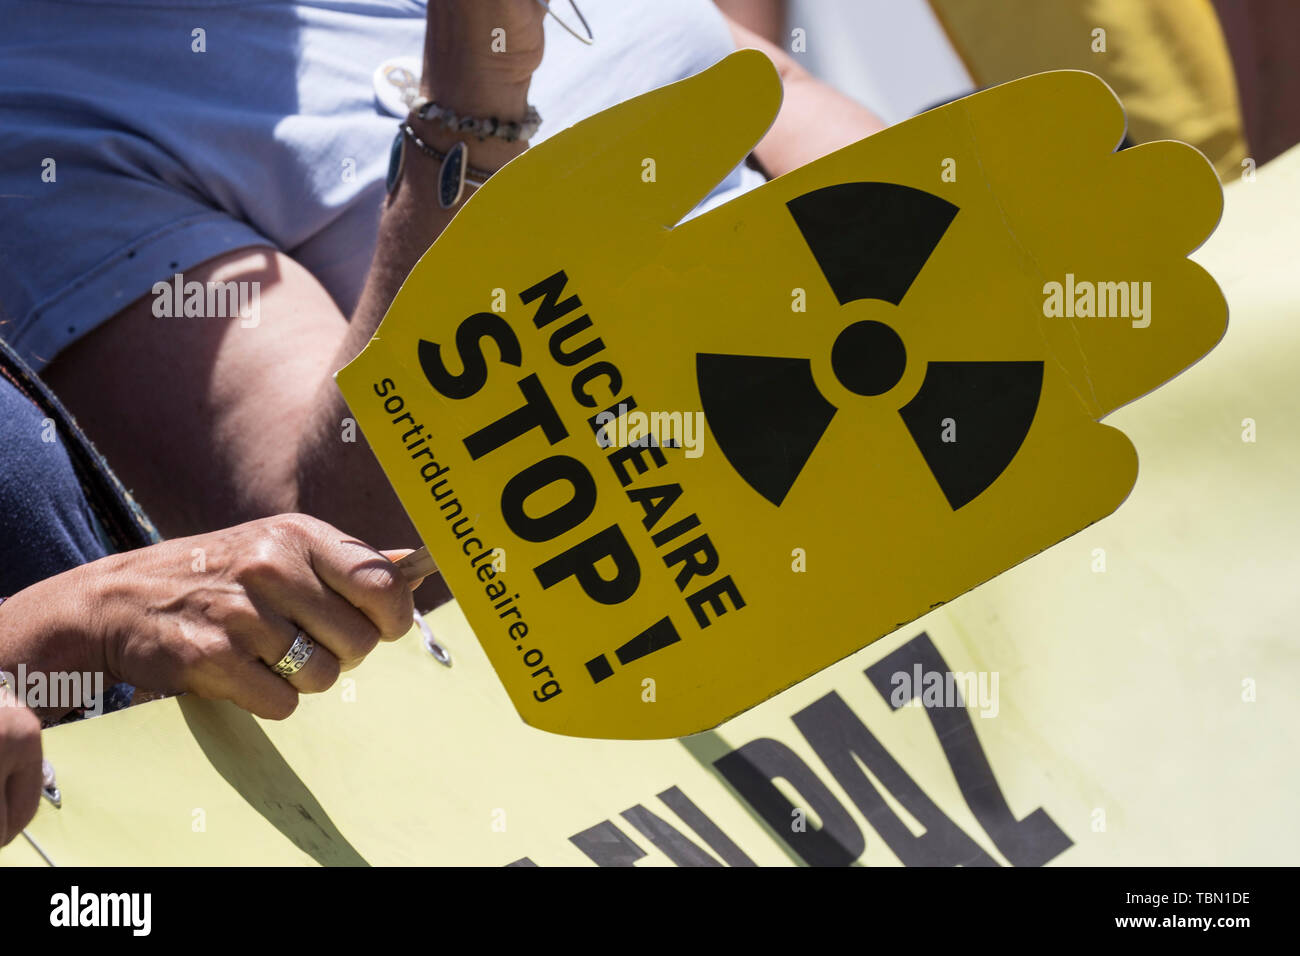 Stop nuclear energy placard during he protest. Ecologists from the Iberian Peninsula accompanied by activists from the United States, Turkey, France and Argentina, protested in Madrid for the closure of nuclear power plants, uranium mines and high-level radioactive waste management. In addition, activists have protested a new energy model to avoid cases such as Chernobyl in Ukraine and have demanded the closure of the Almaraz Nuclear Power Plant in Spain. Stock Photo